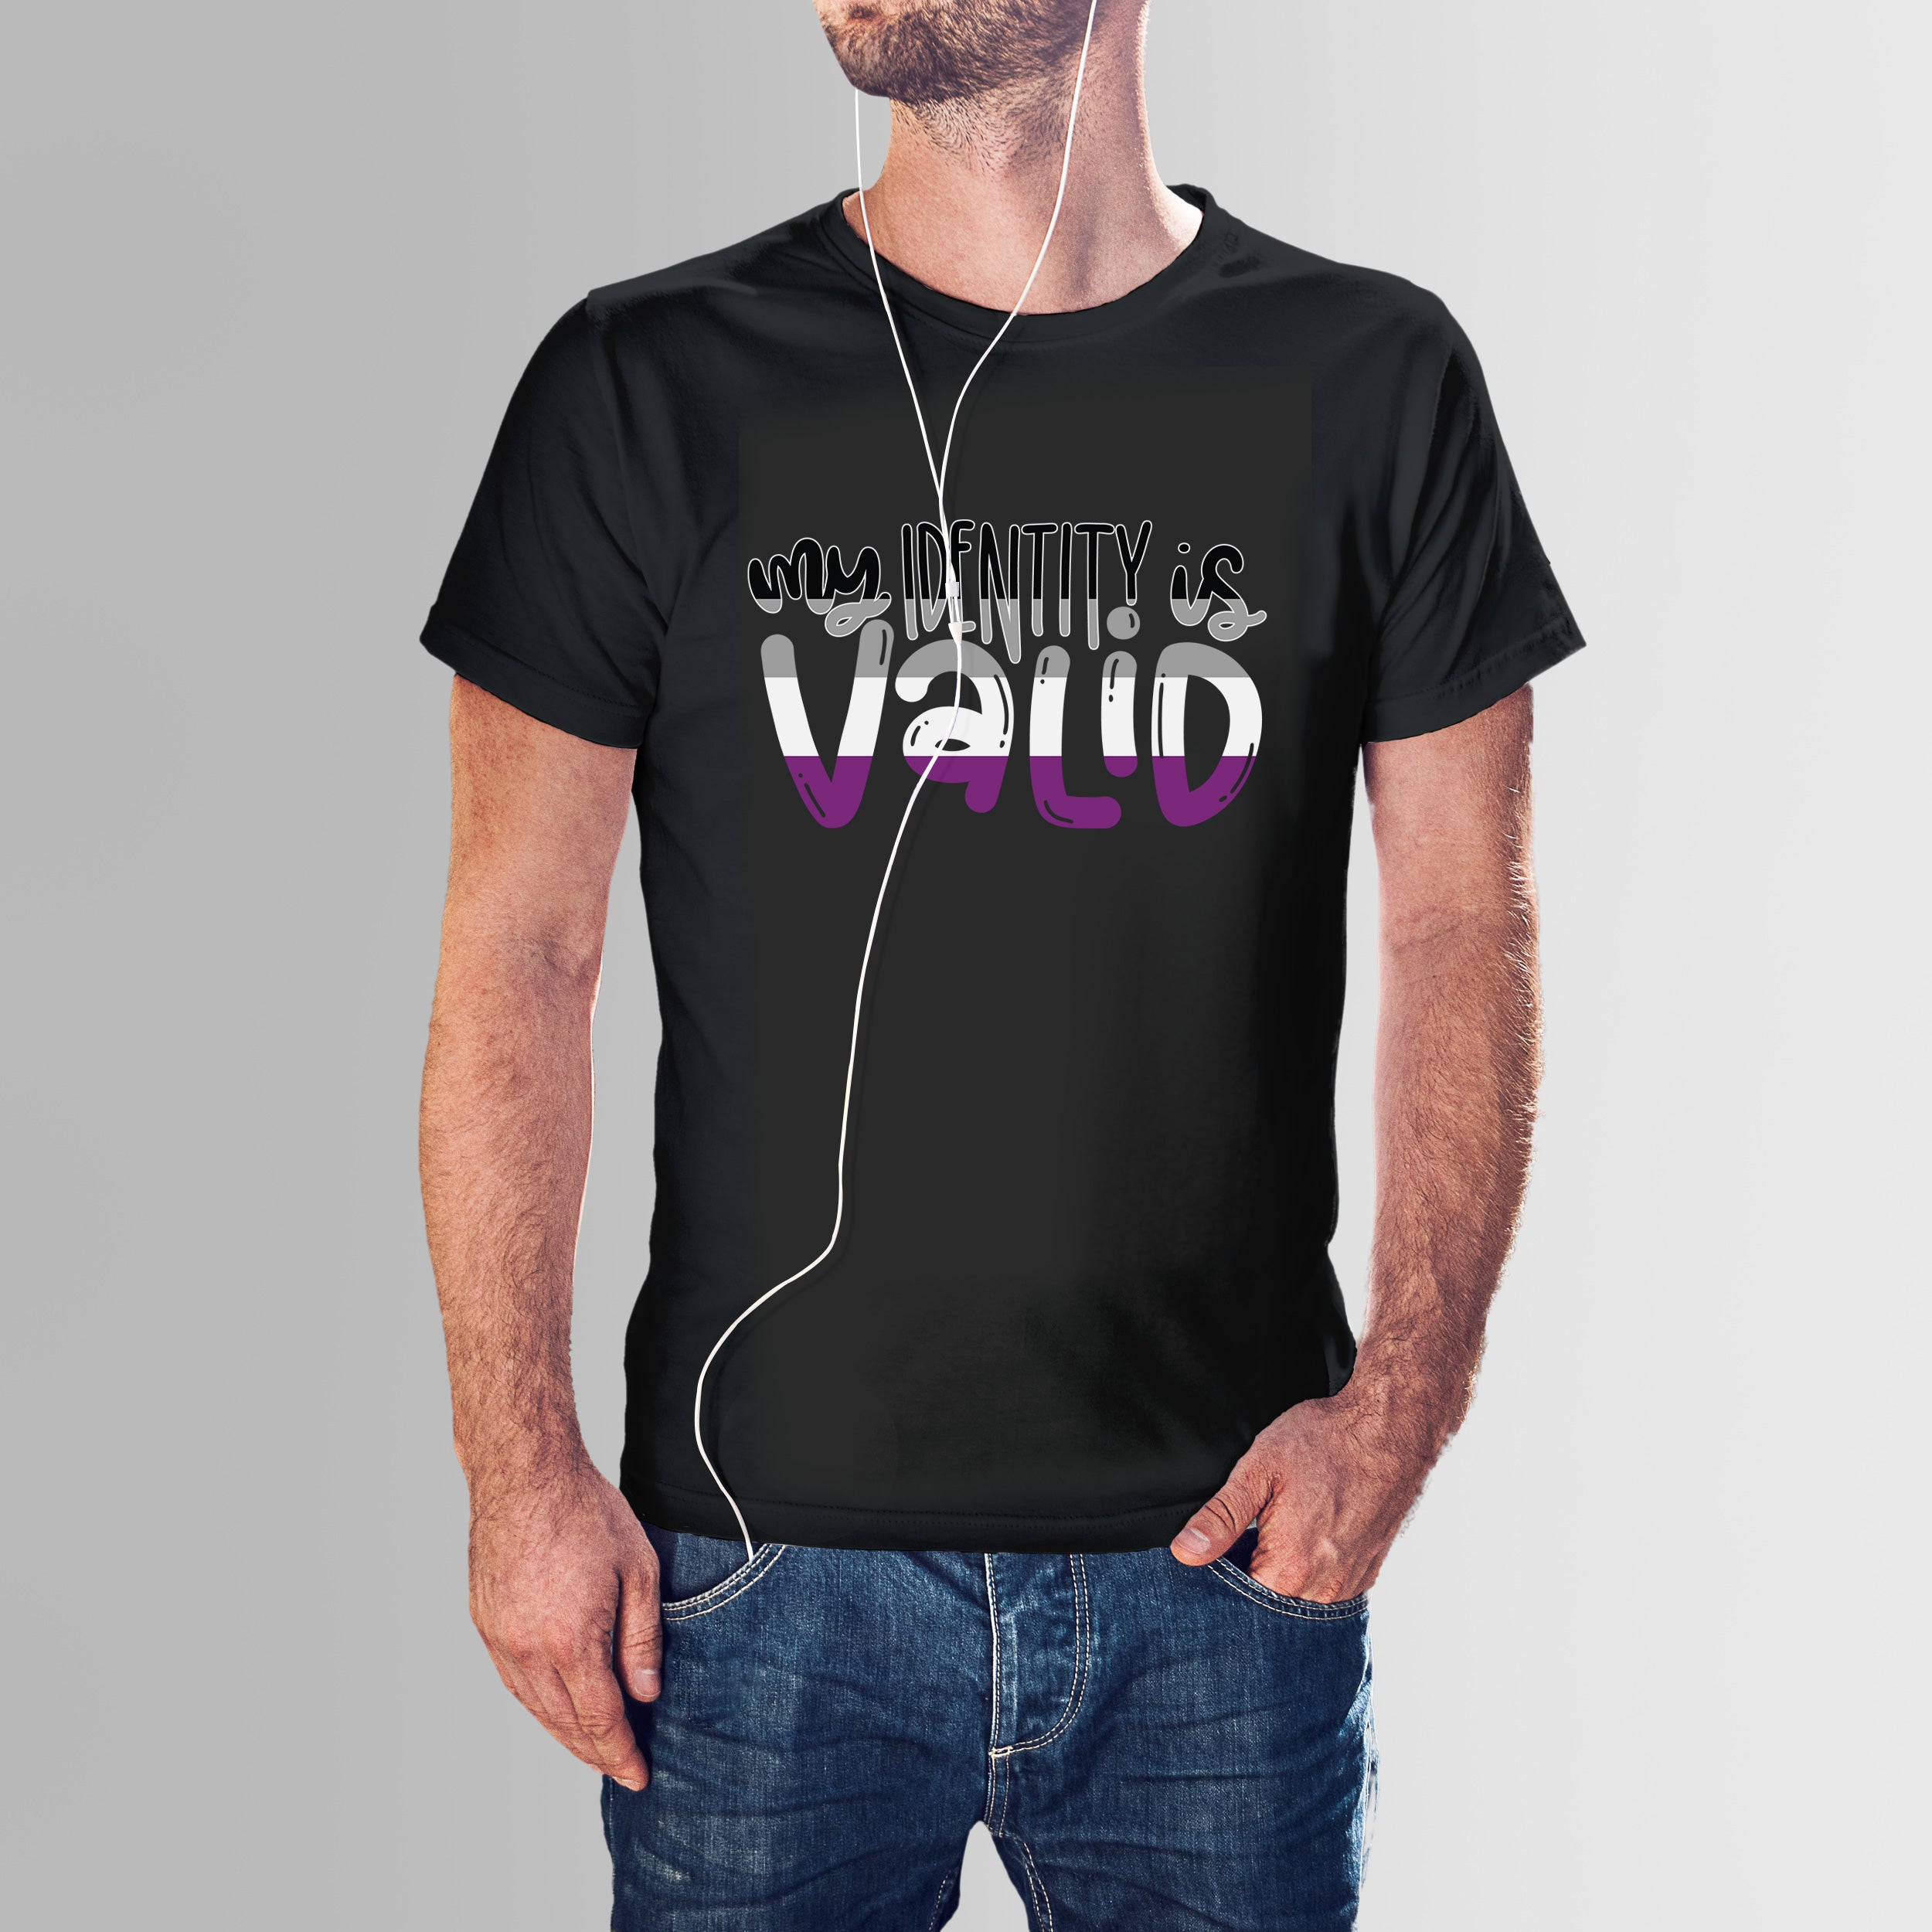 My Identity is VALID - Asexual Shirt